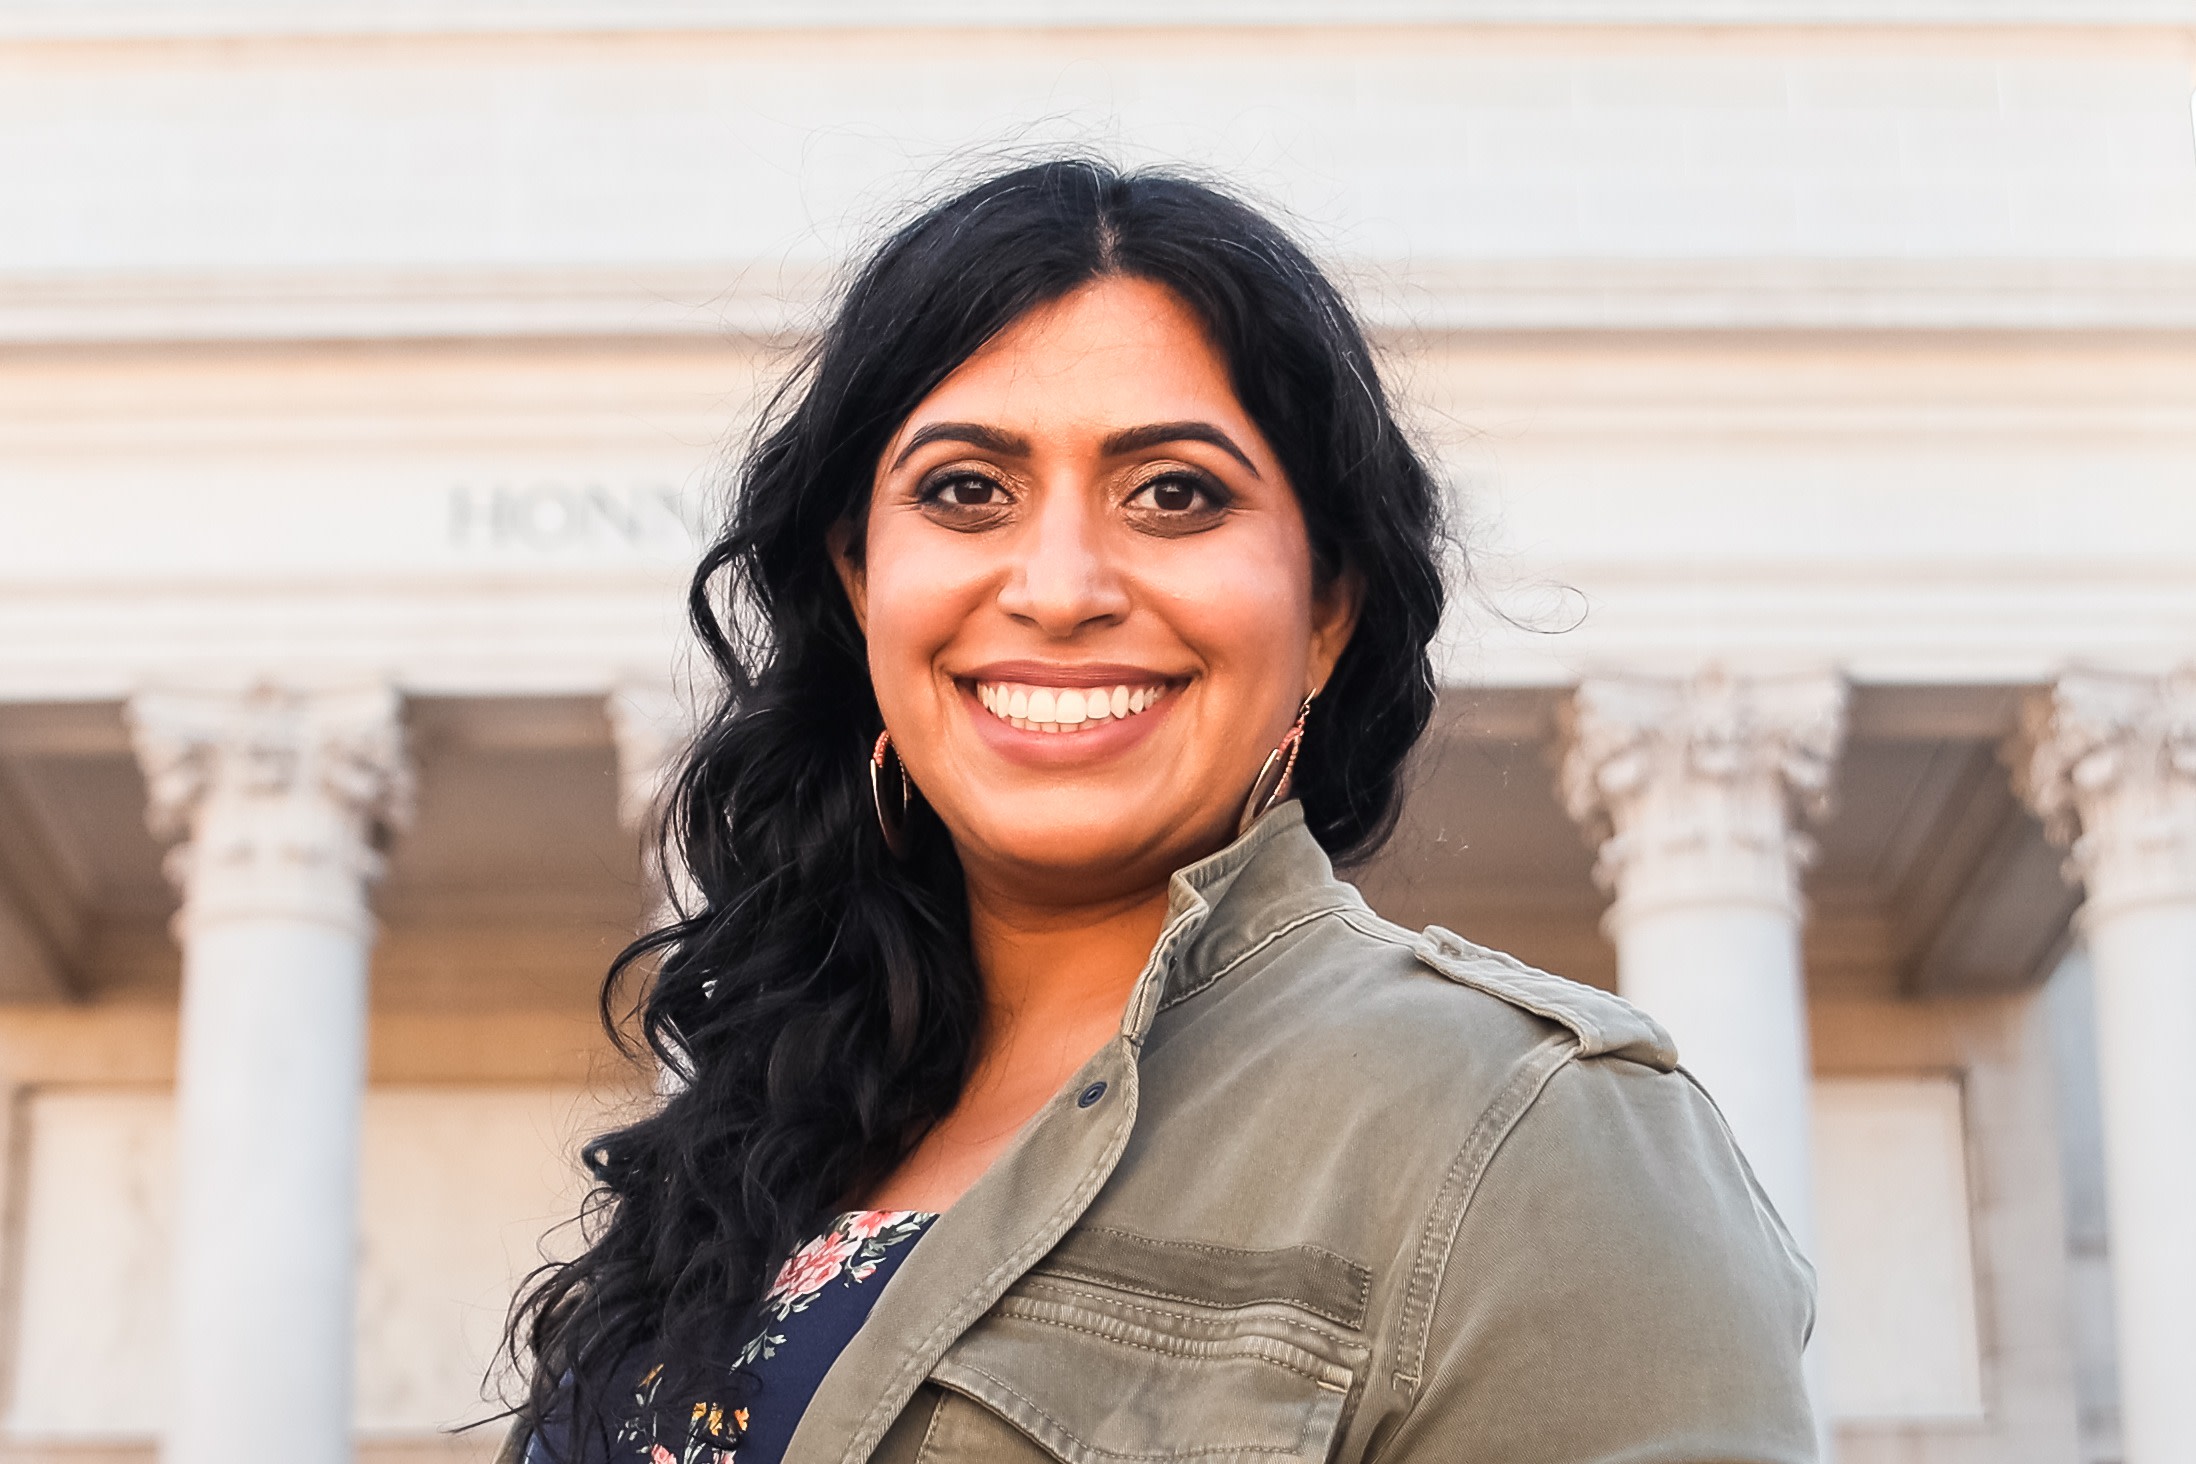 Author Neha smiling in front of a statuesque, column-lined building